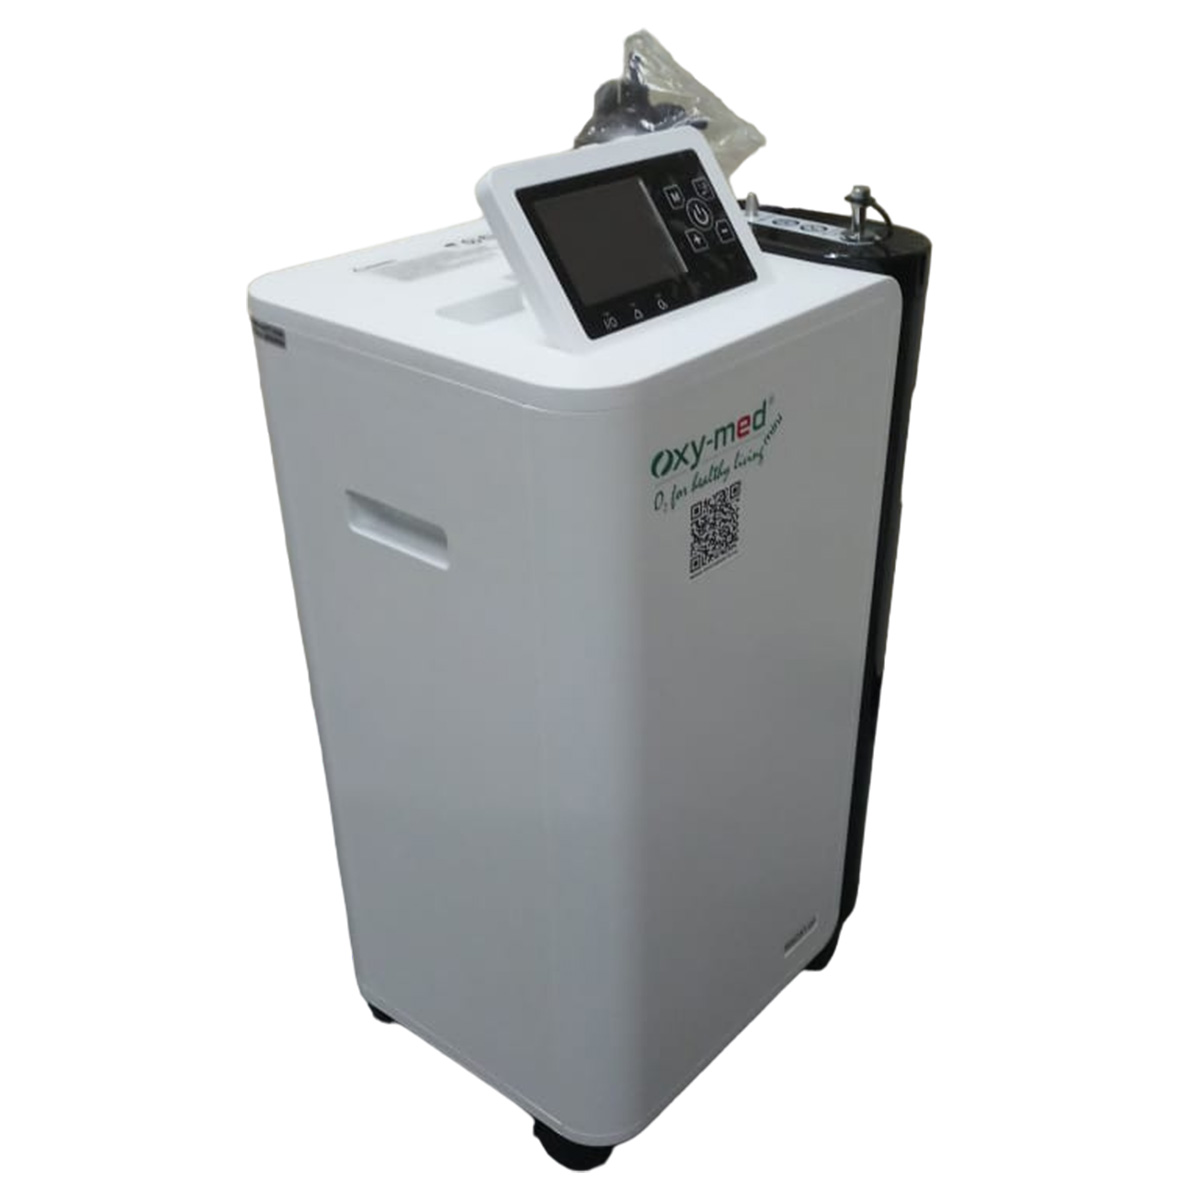 5 Lpm Oxymed Oxygen Concentrator On Sale Suppliers, Service Provider in Army welfare housing organisation